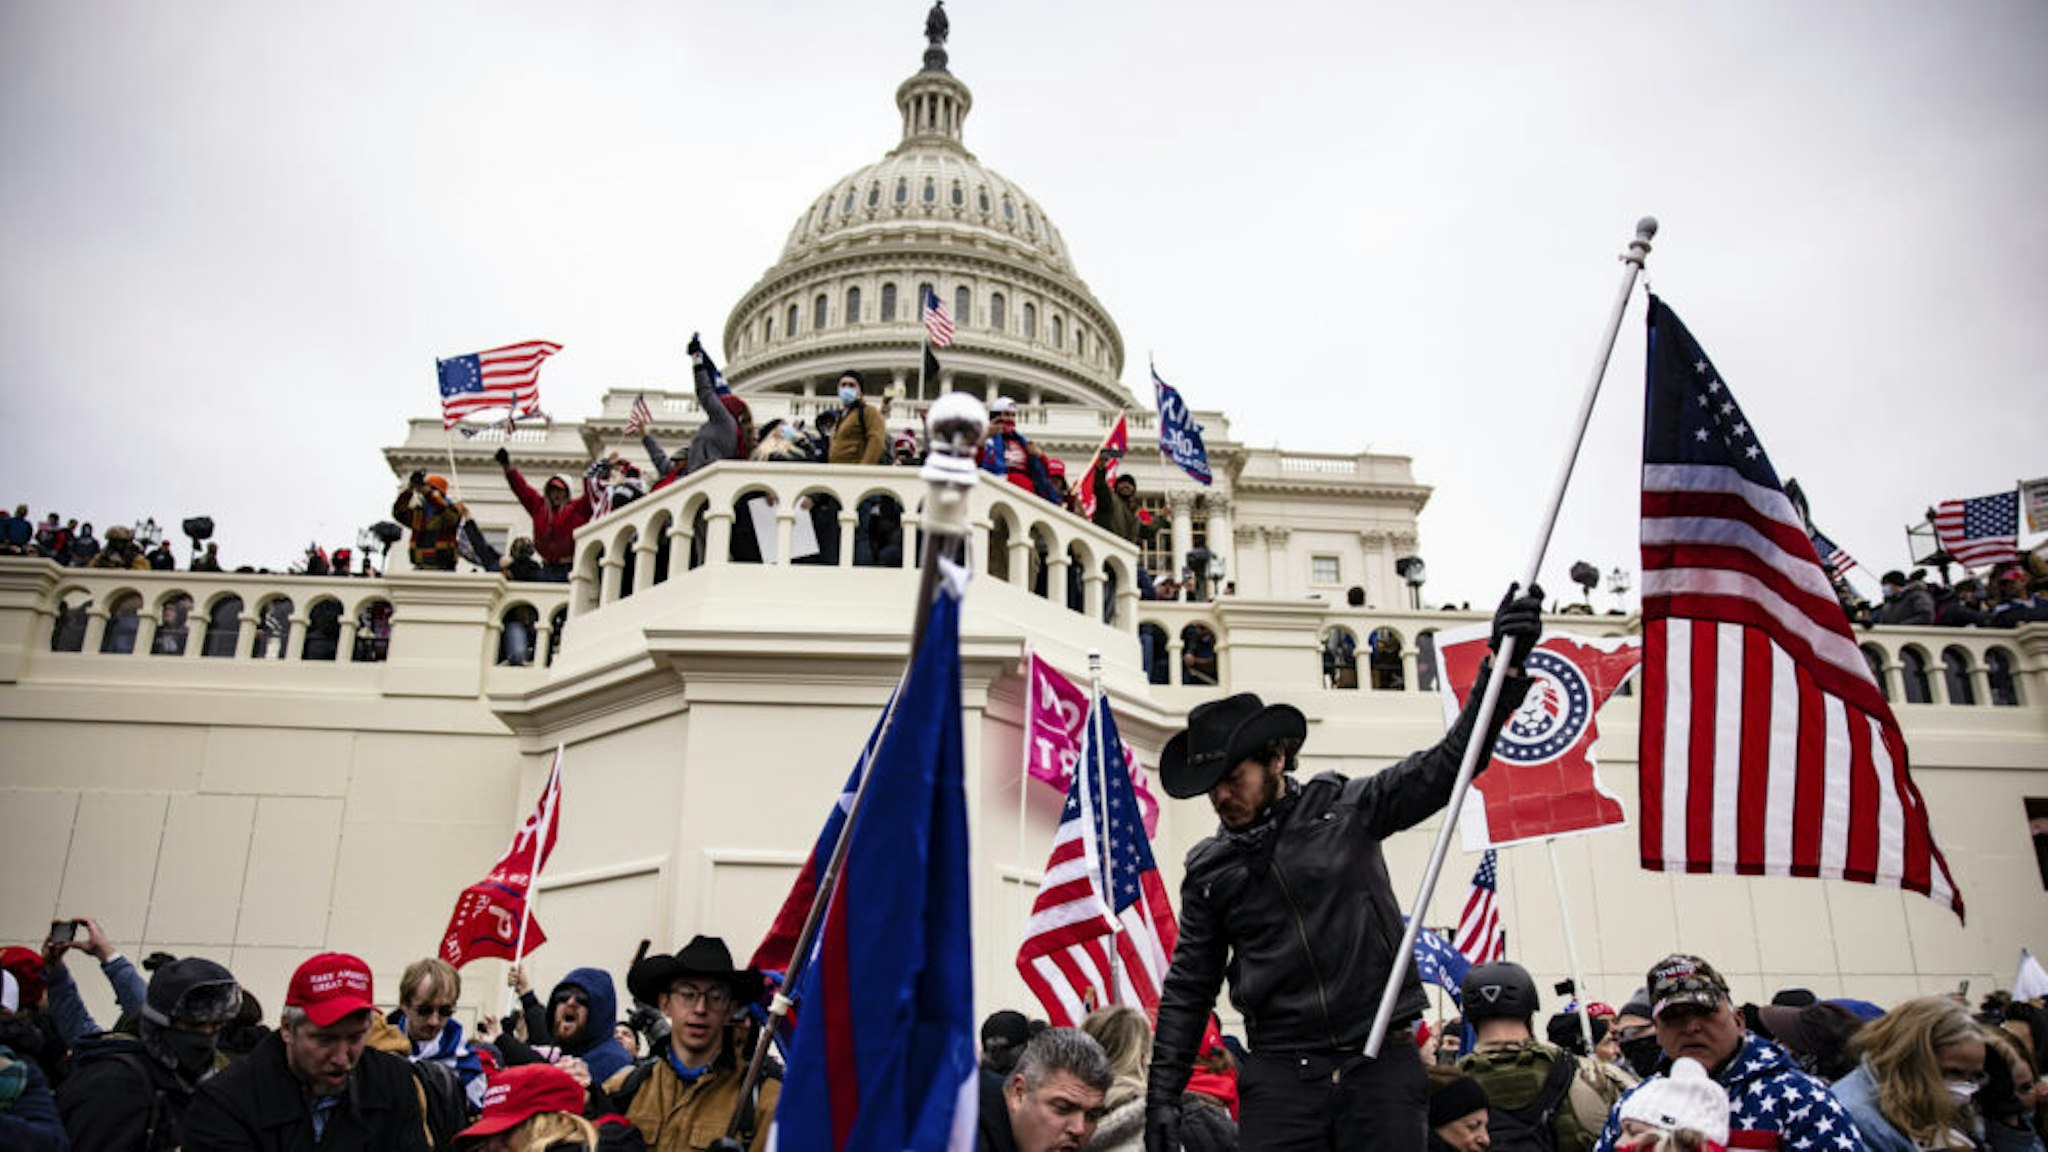 WASHINGTON, DC - JANUARY 06: Pro-Trump supporters storm the U.S. Capitol following a rally with President Donald Trump on January 6, 2021 in Washington, DC. Trump supporters gathered in the nation's capital today to protest the ratification of President-elect Joe Biden's Electoral College victory over President Trump in the 2020 election.